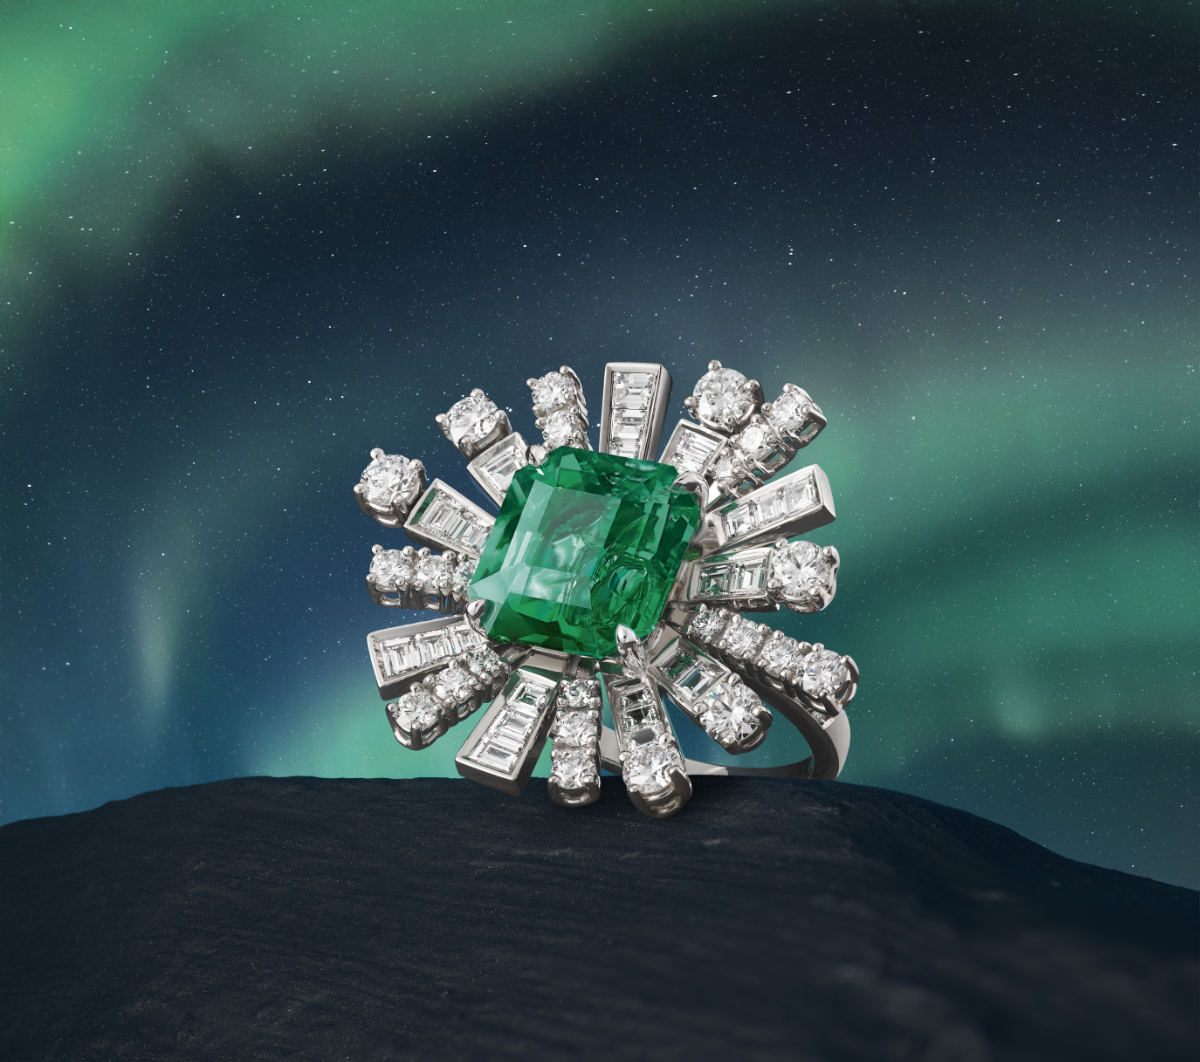 Piaget's Extraordinary Lights: A New High Jewellery Collection Like No Other